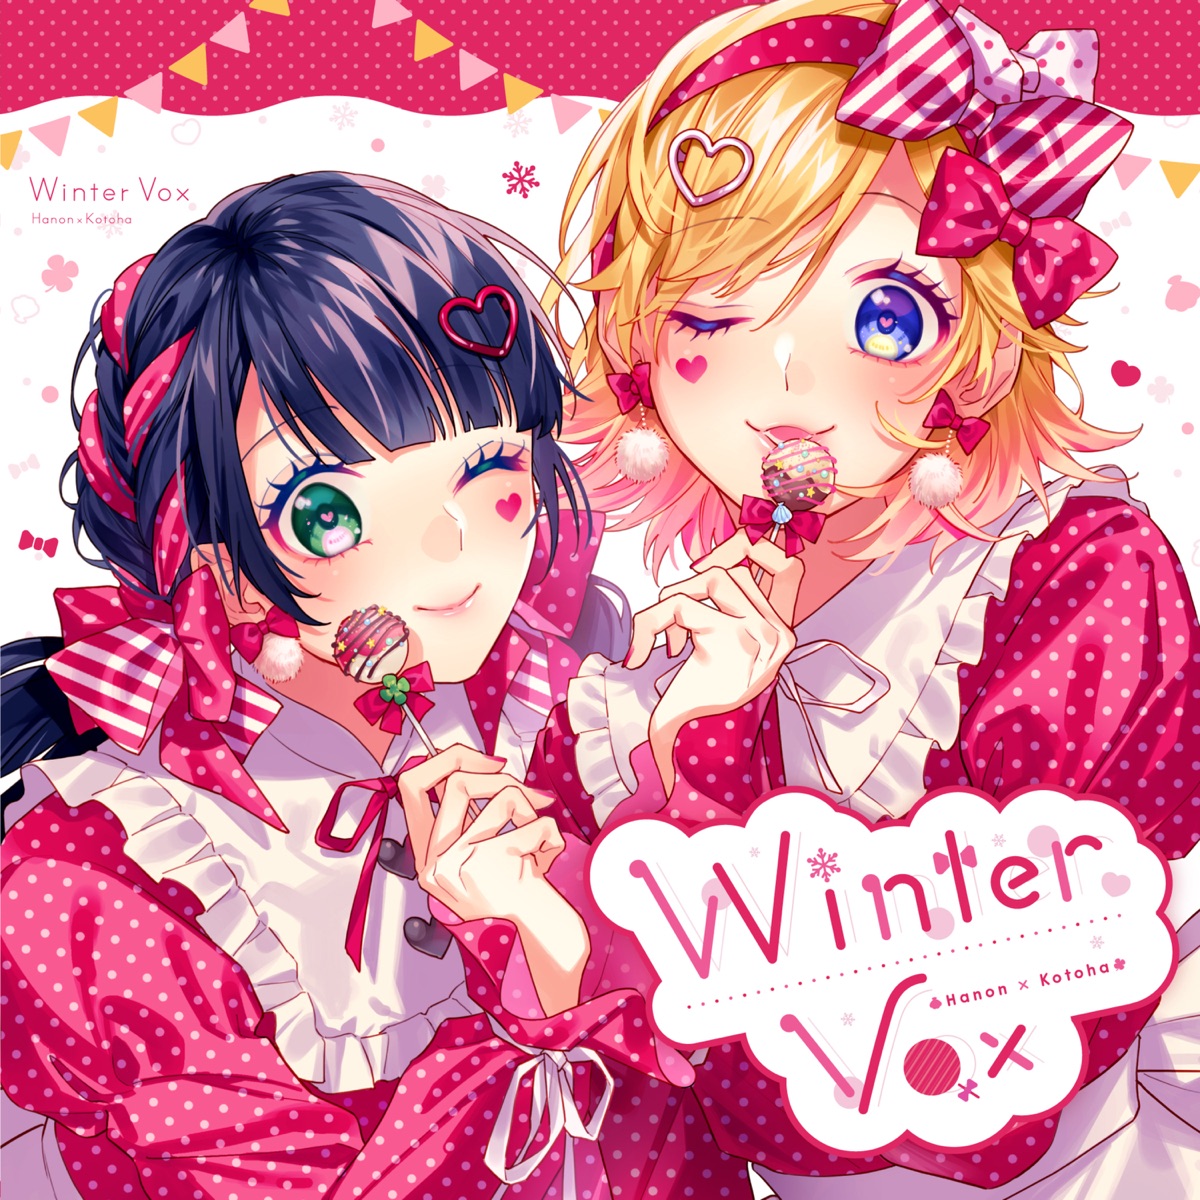 Cover art for『HoneyWorks feat. Hanon×Kotoha - ハッピークリスマスパーティ』from the release『Winter Vox